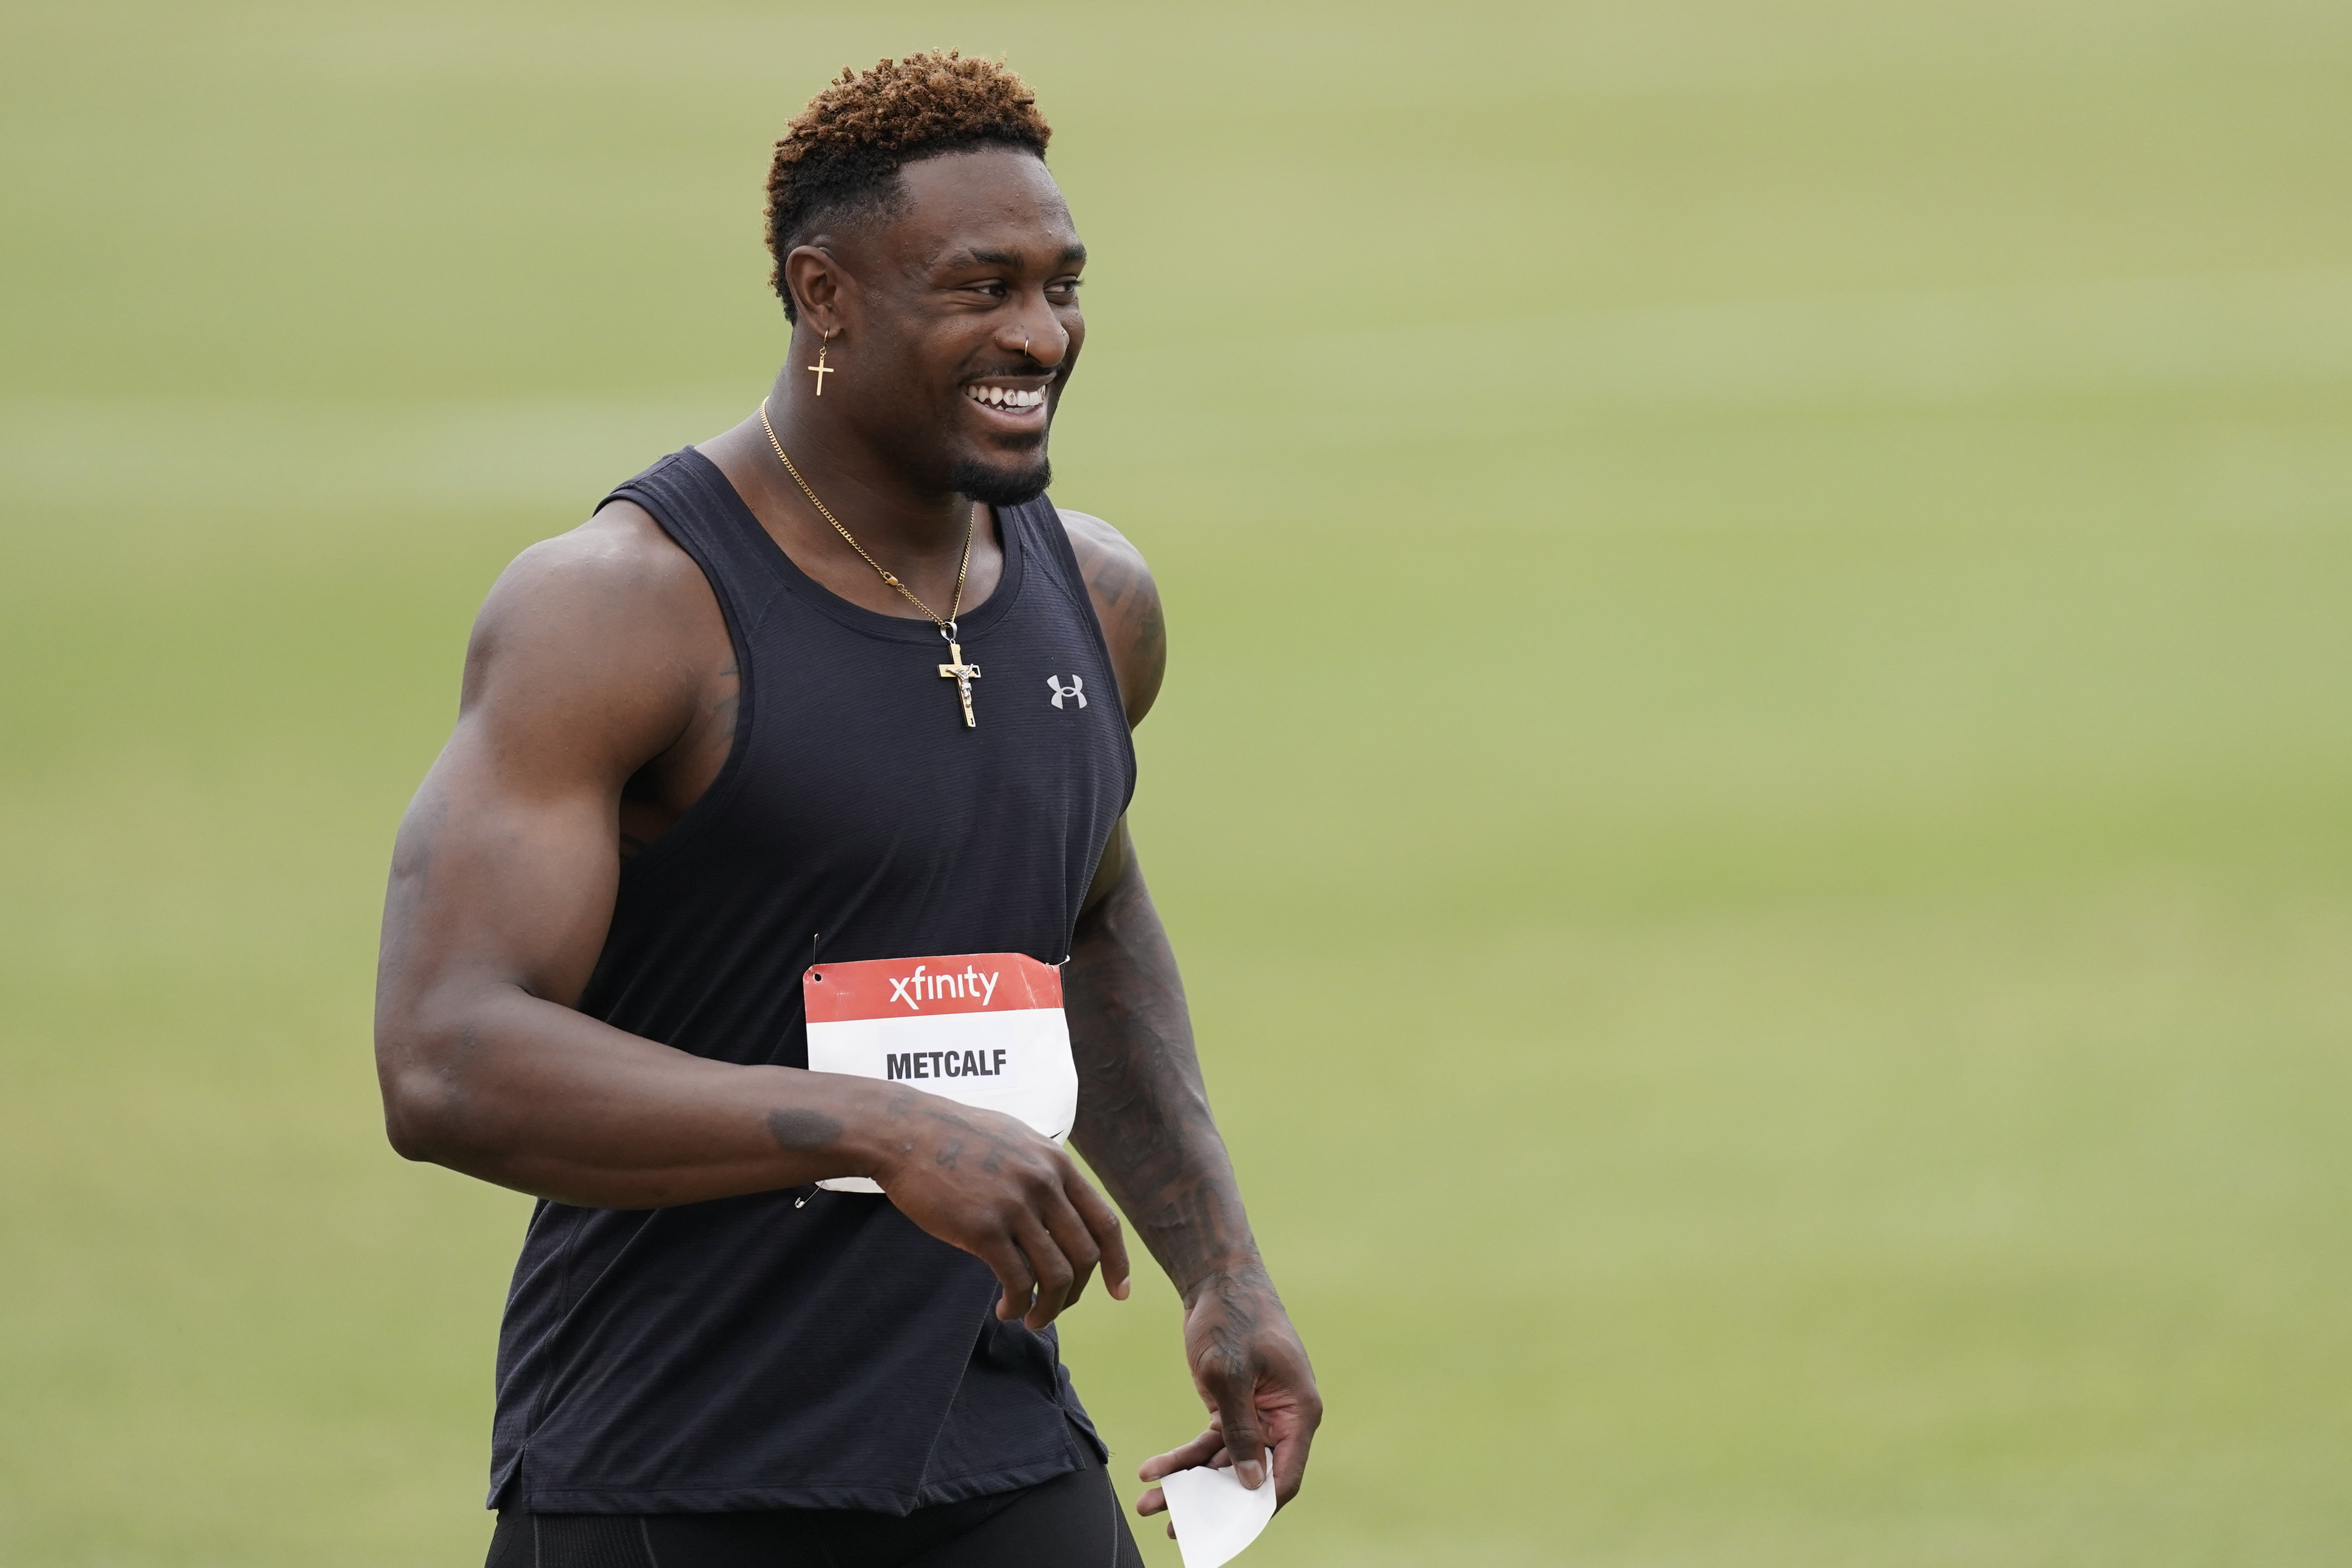 U.S. track athletes eager for DK Metcalf, NFL to experience real speed